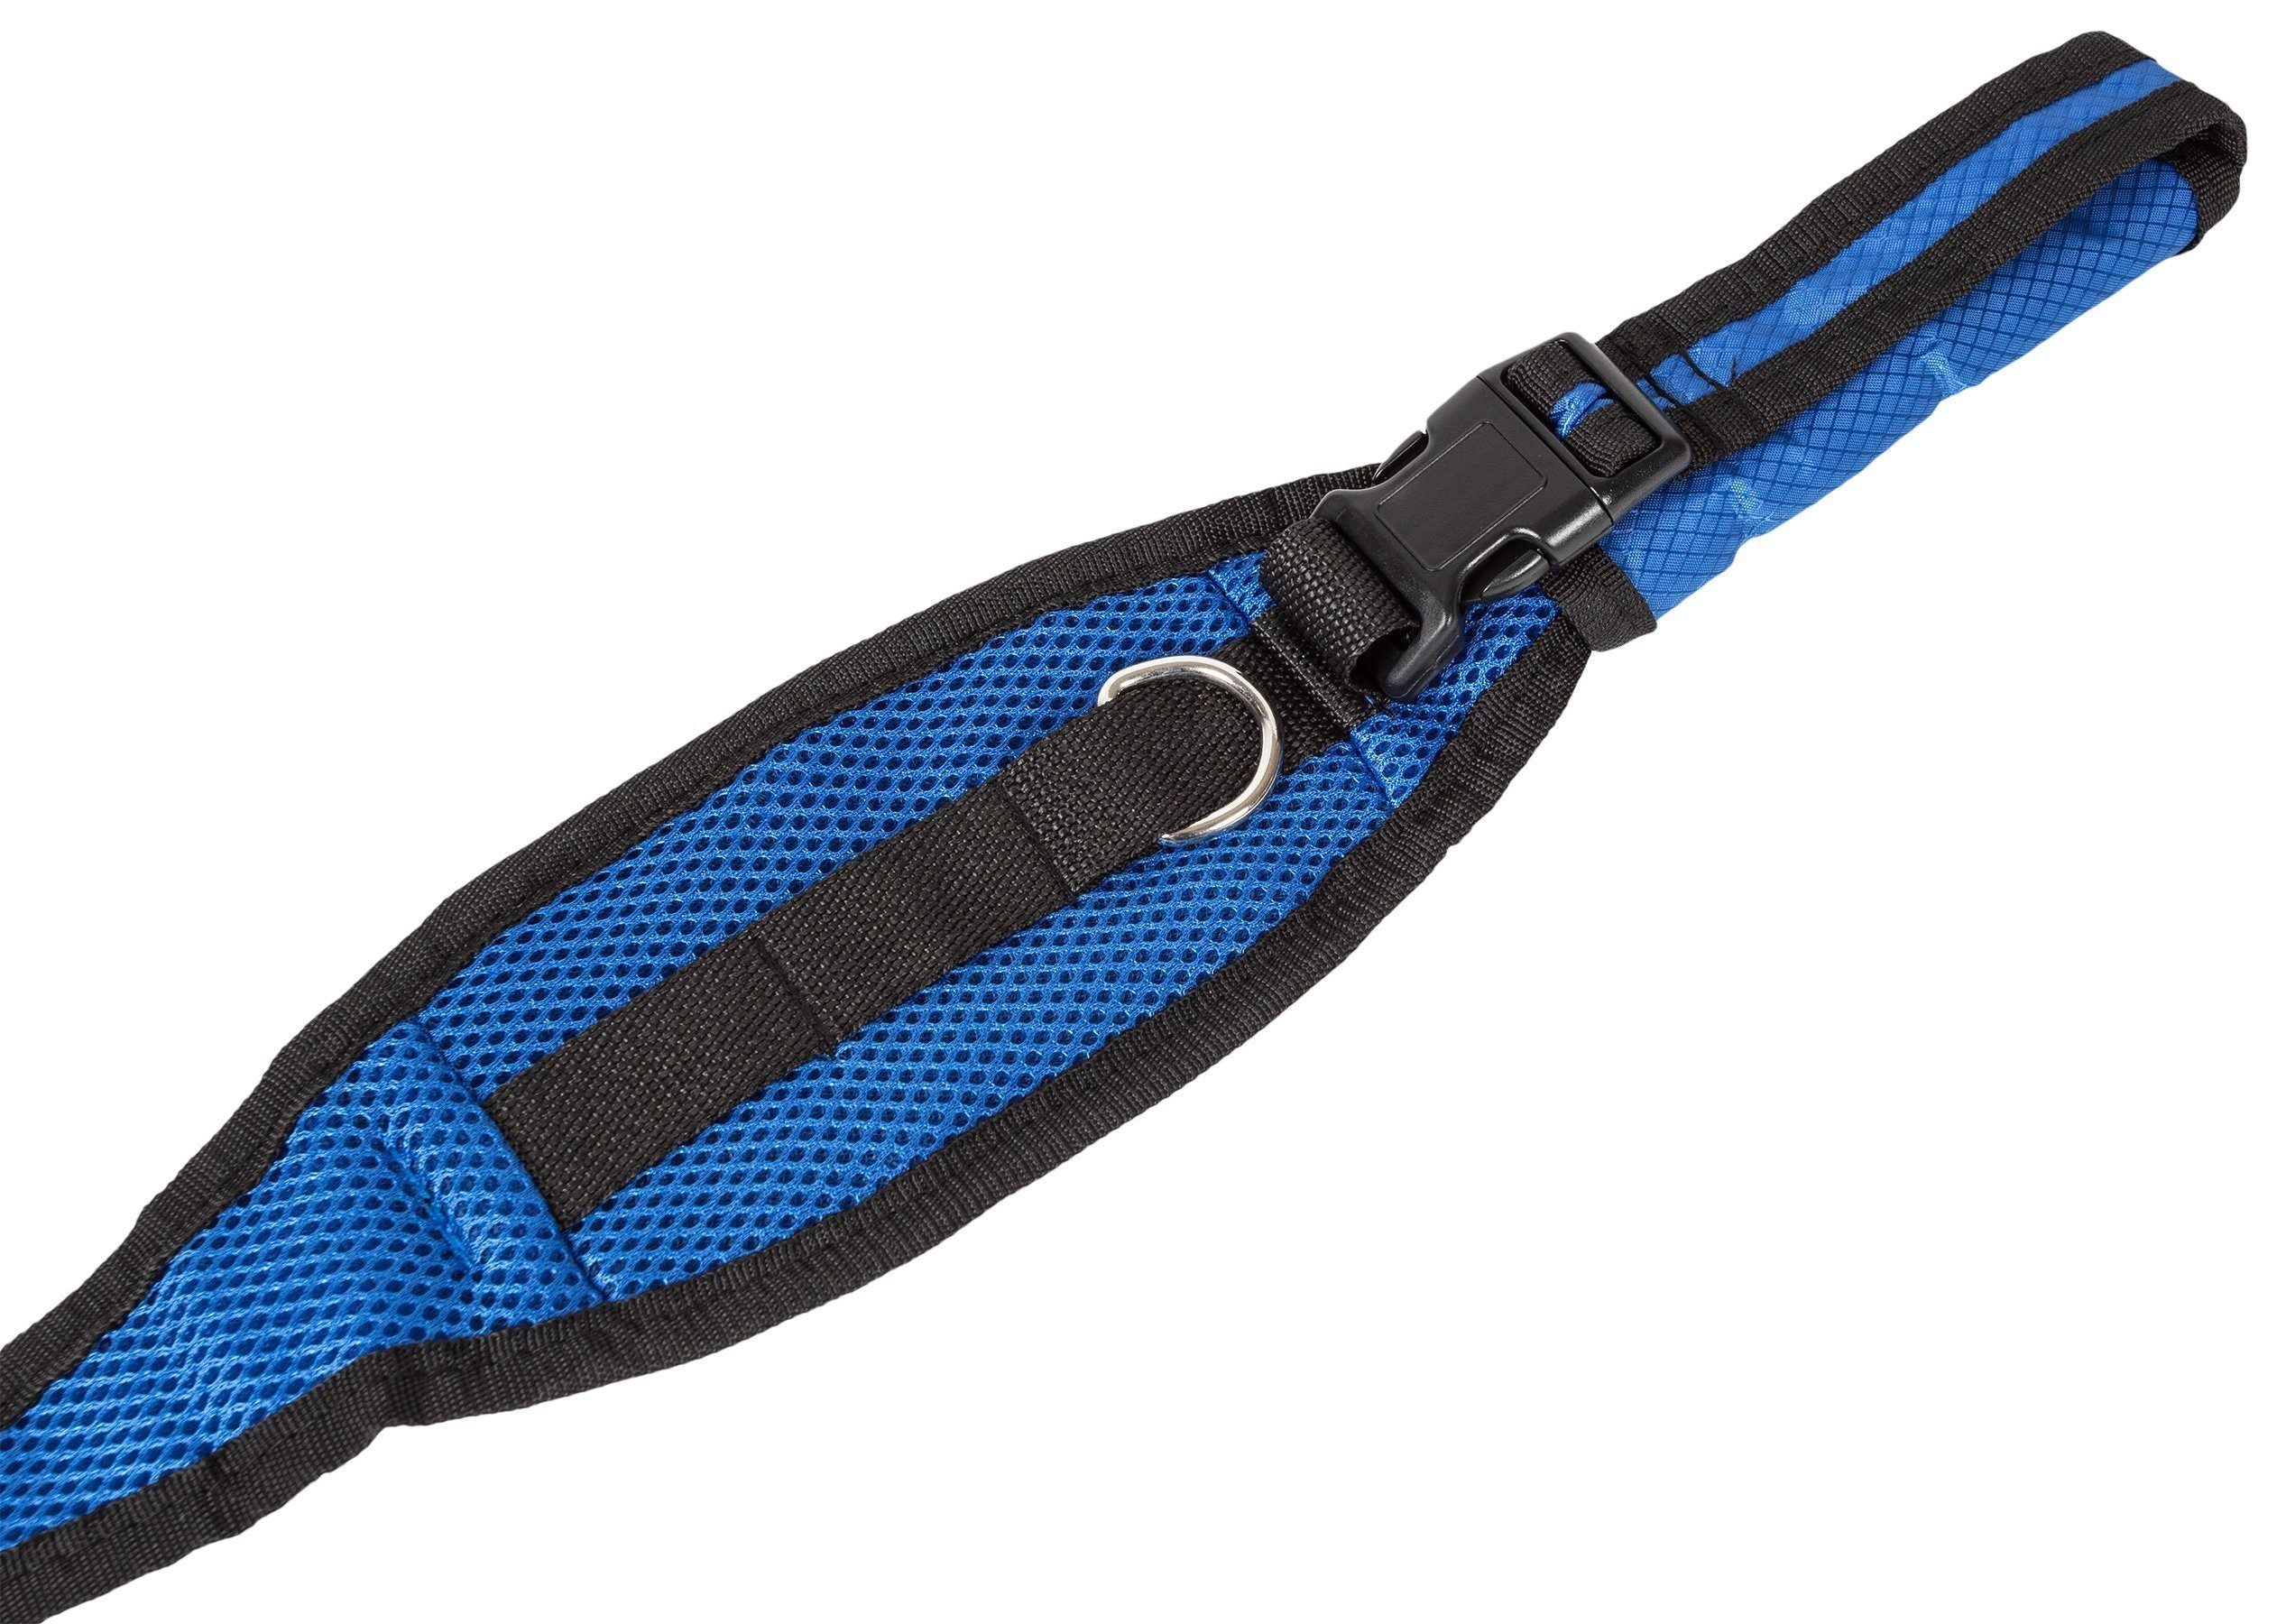 Pet Life ® 'Echelon' Hands Free and Convertible 2-In-1 Training Pet Dog Leash and Pet Belt Trainer  